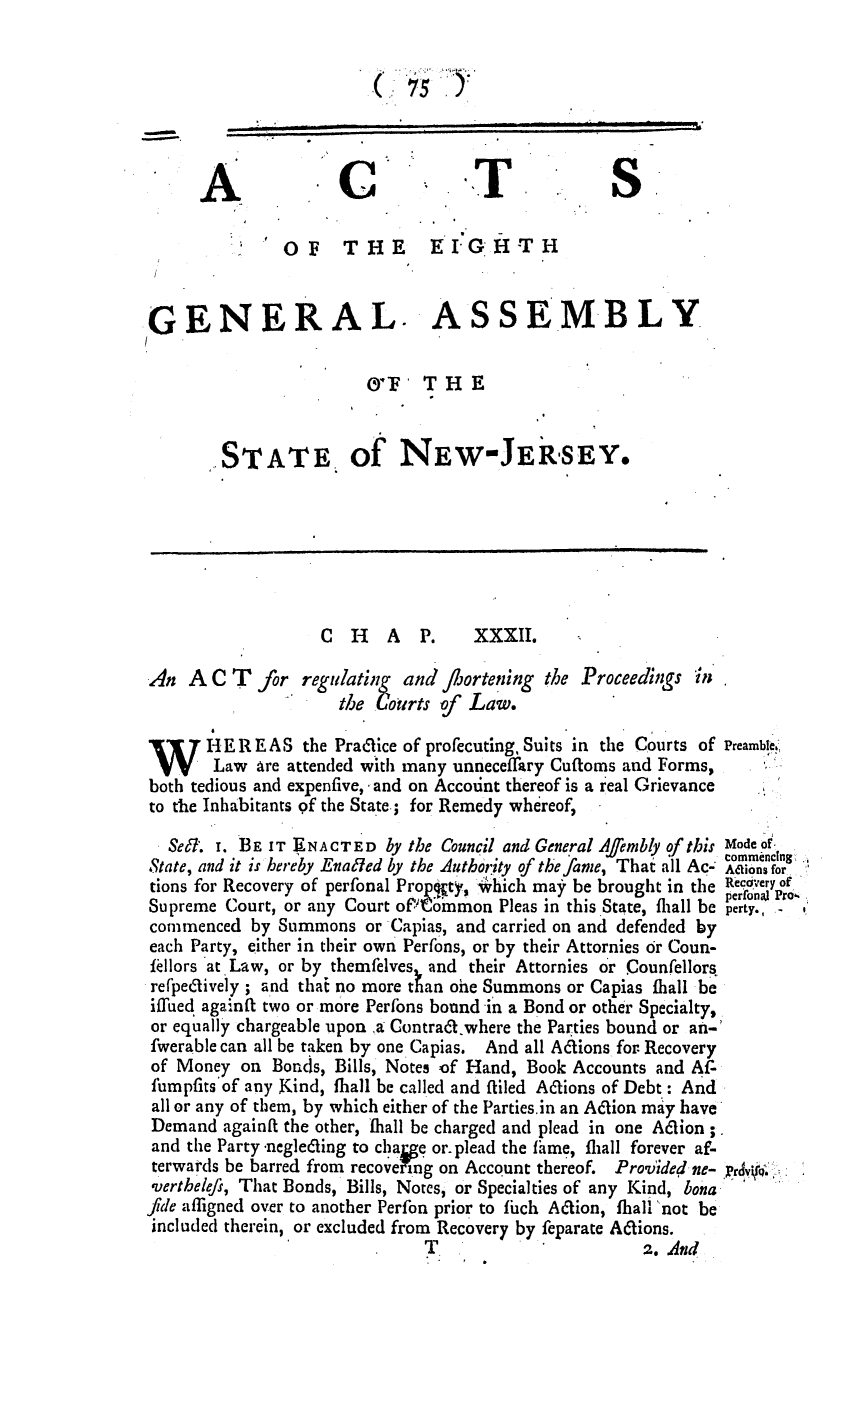 handle is hein.ssl/ssnj0240 and id is 1 raw text is: (      7   .
A                                             S
O F THE E IGHTH
.GENERAL. ASSEMBLY
IYF' THE
STATE of NEW-JERSEY.
C  H   A   P.    XXXII.
An A C T for regulating and flortening the Proceedings in
the Coirts of Law.
W       HER EAS the Praclice of profecuting, Suits in the Courts of Preamble,:,
Law are attended with many unneceflary Cuftoms and Forms,
both tedious and expenfive, and on Account thereof is a real Grievance
to the Inhabitants of the State.; for Remedy whereof,
SeF. I. BE IT ENACTED by the Council and General Affembly of this Mode of
commencing
State, and it is hereby Enaled by the Authoity of the fame, That all Ac. Adions for,
tions for Recovery of perfonal Prop 't,  hich ma  be brought in the Reacery oe
pertn,   'Pro~.
Supreme Court, or any Court oft'Common Pleas in this State, flall be peray., r,
commenced by Summons or Capias, and carried on and defended by
each Party, either in their own Perfons, or by their Attornies or Coun-
Iellors at Law, or by themfelves and their Attornies or Counfellors,
refpeclively ; and thai no more than one Summons or Capias ihall be
iffued againfi two or more Perfons bound in a Bond or other Specialty,
or equally chargeable upon .,a Contraft.where the Parties bound or an-'
fwerable can all be taken by one Capias. And all A&ions for. Recovery
of Money on Bonds, Bills, Notes of Hand, Book Accounts and Af-
fumpfits'of any Kind, fhall be called and filed Actions of Debt.: And
all or any of them, by which either of the Partiesin an Aaion may have
Demand againft the other, , hall be charged and plead in one A6cion ;.
and the Party .negle&ing to chai e or. plead the fame, fliall forever af-
terwards be barred from recovelping on Account thereof. Provided-ne- prv.
verthelefi, That Bonds, Bills, Notes, or Specialties of any Kind, bona
fide affigned over to another Perfon prior to fhch Ation, fhall 'not be
included therein, or excluded from Recovery by feparate Actions.
T.                      2. And


